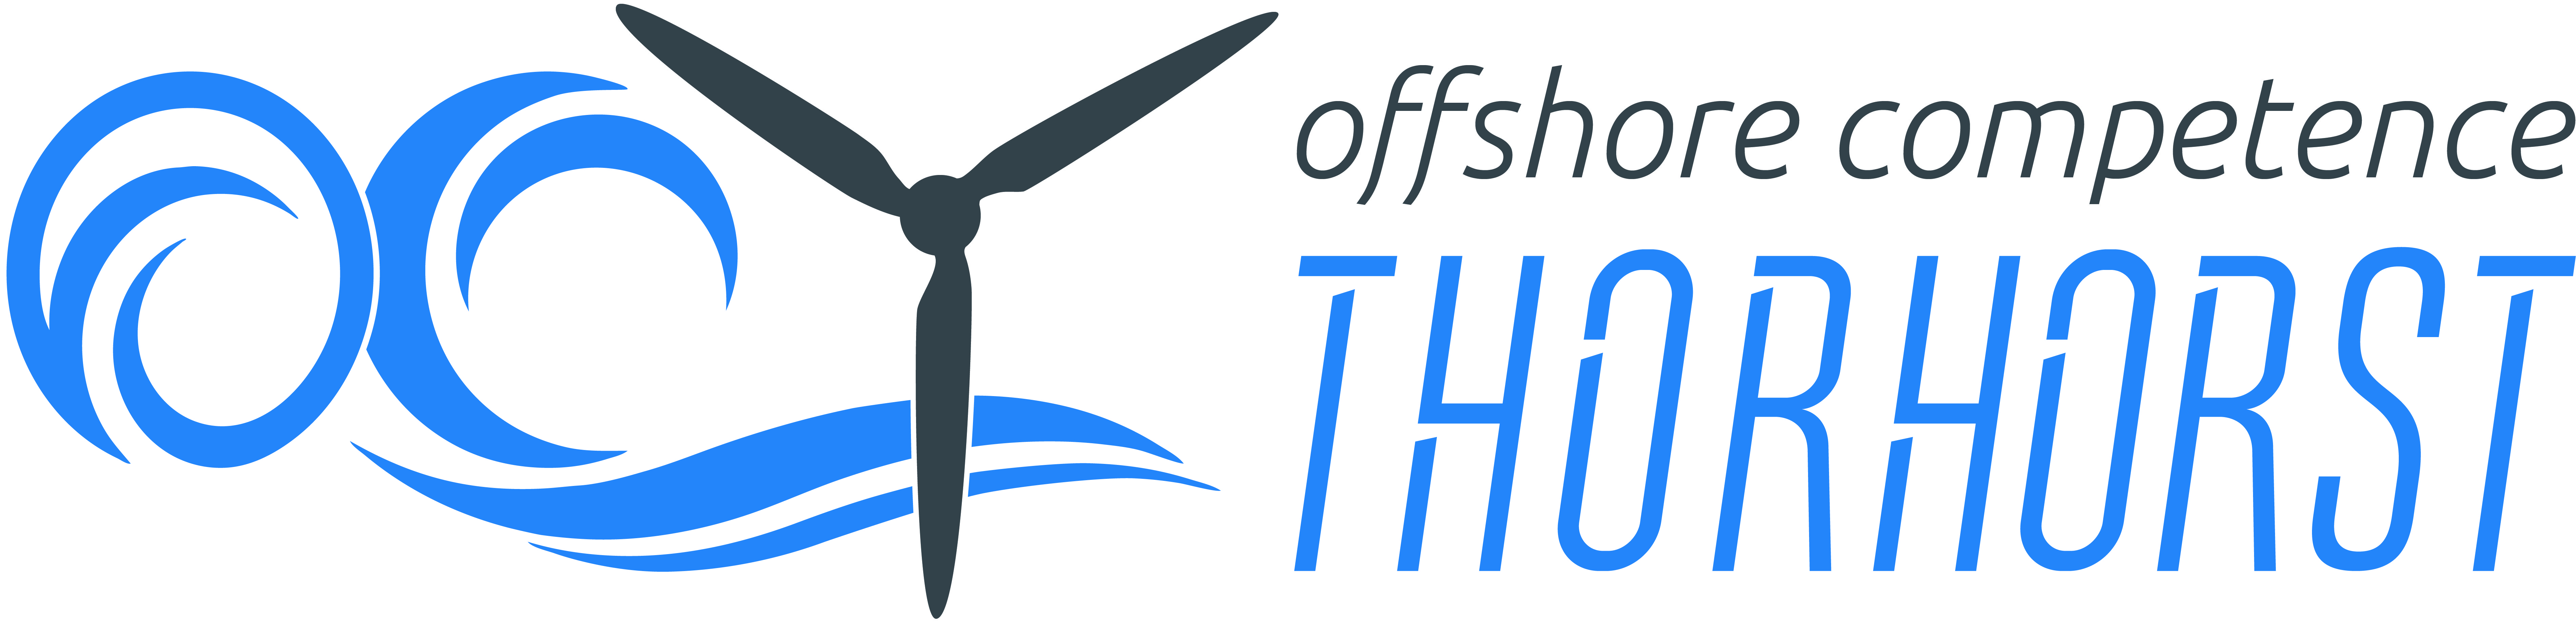 Offshore Competence Thorhorst GmbH